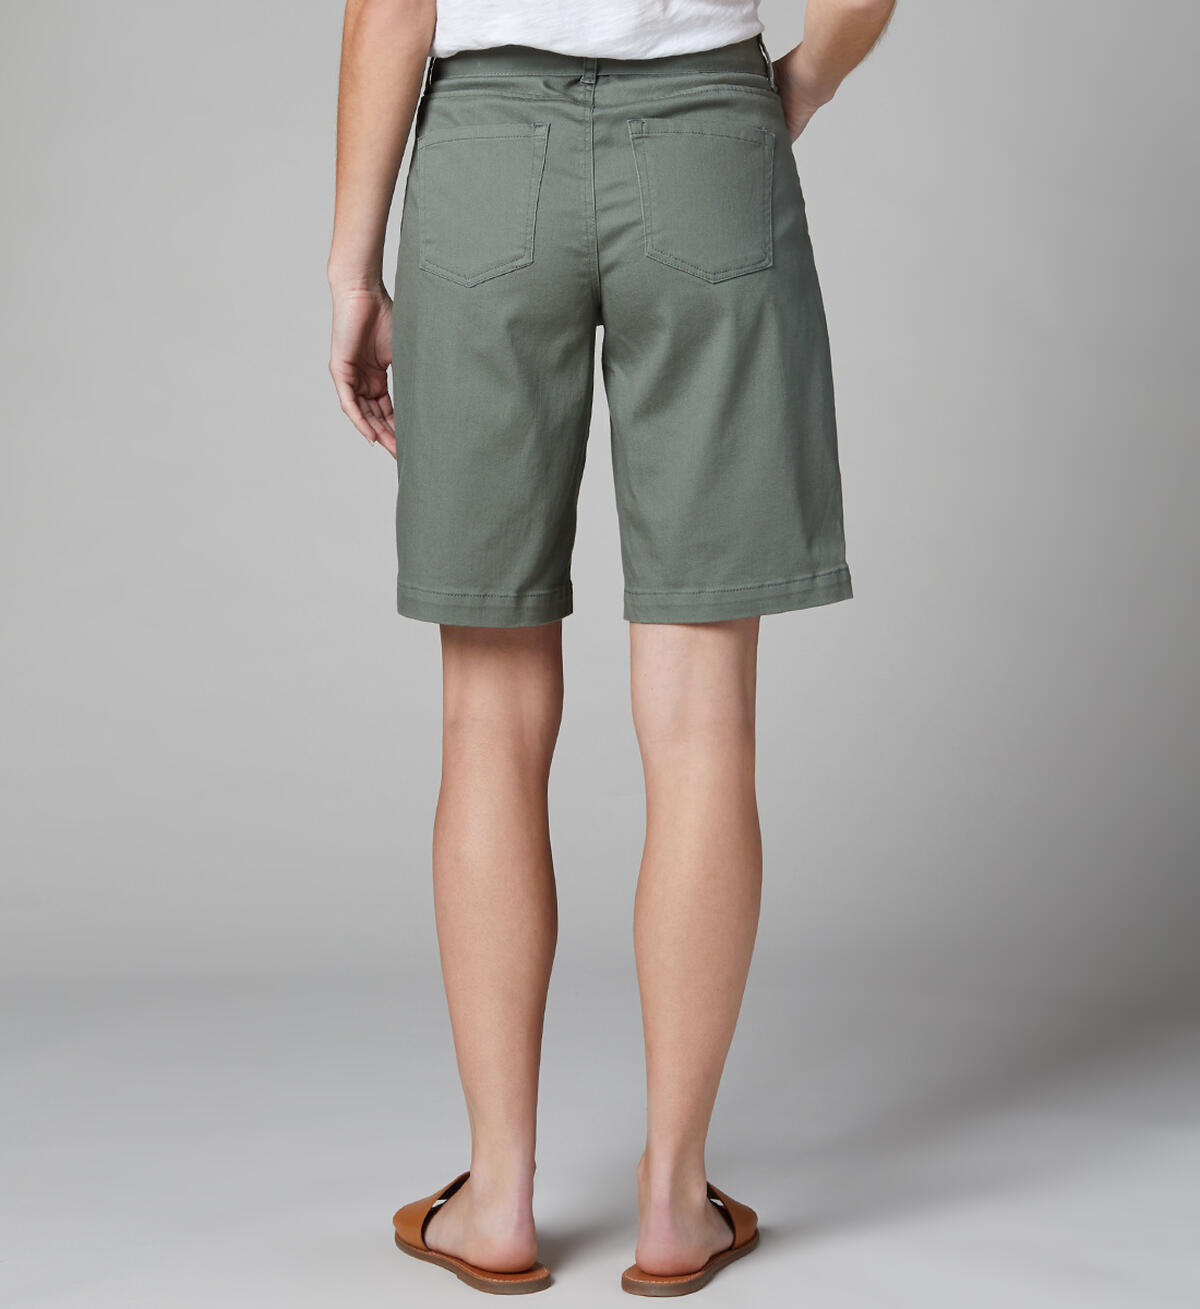 Thelma Mid Rise Bermuda Shorts with Belt Petite, , hi-res image number 1